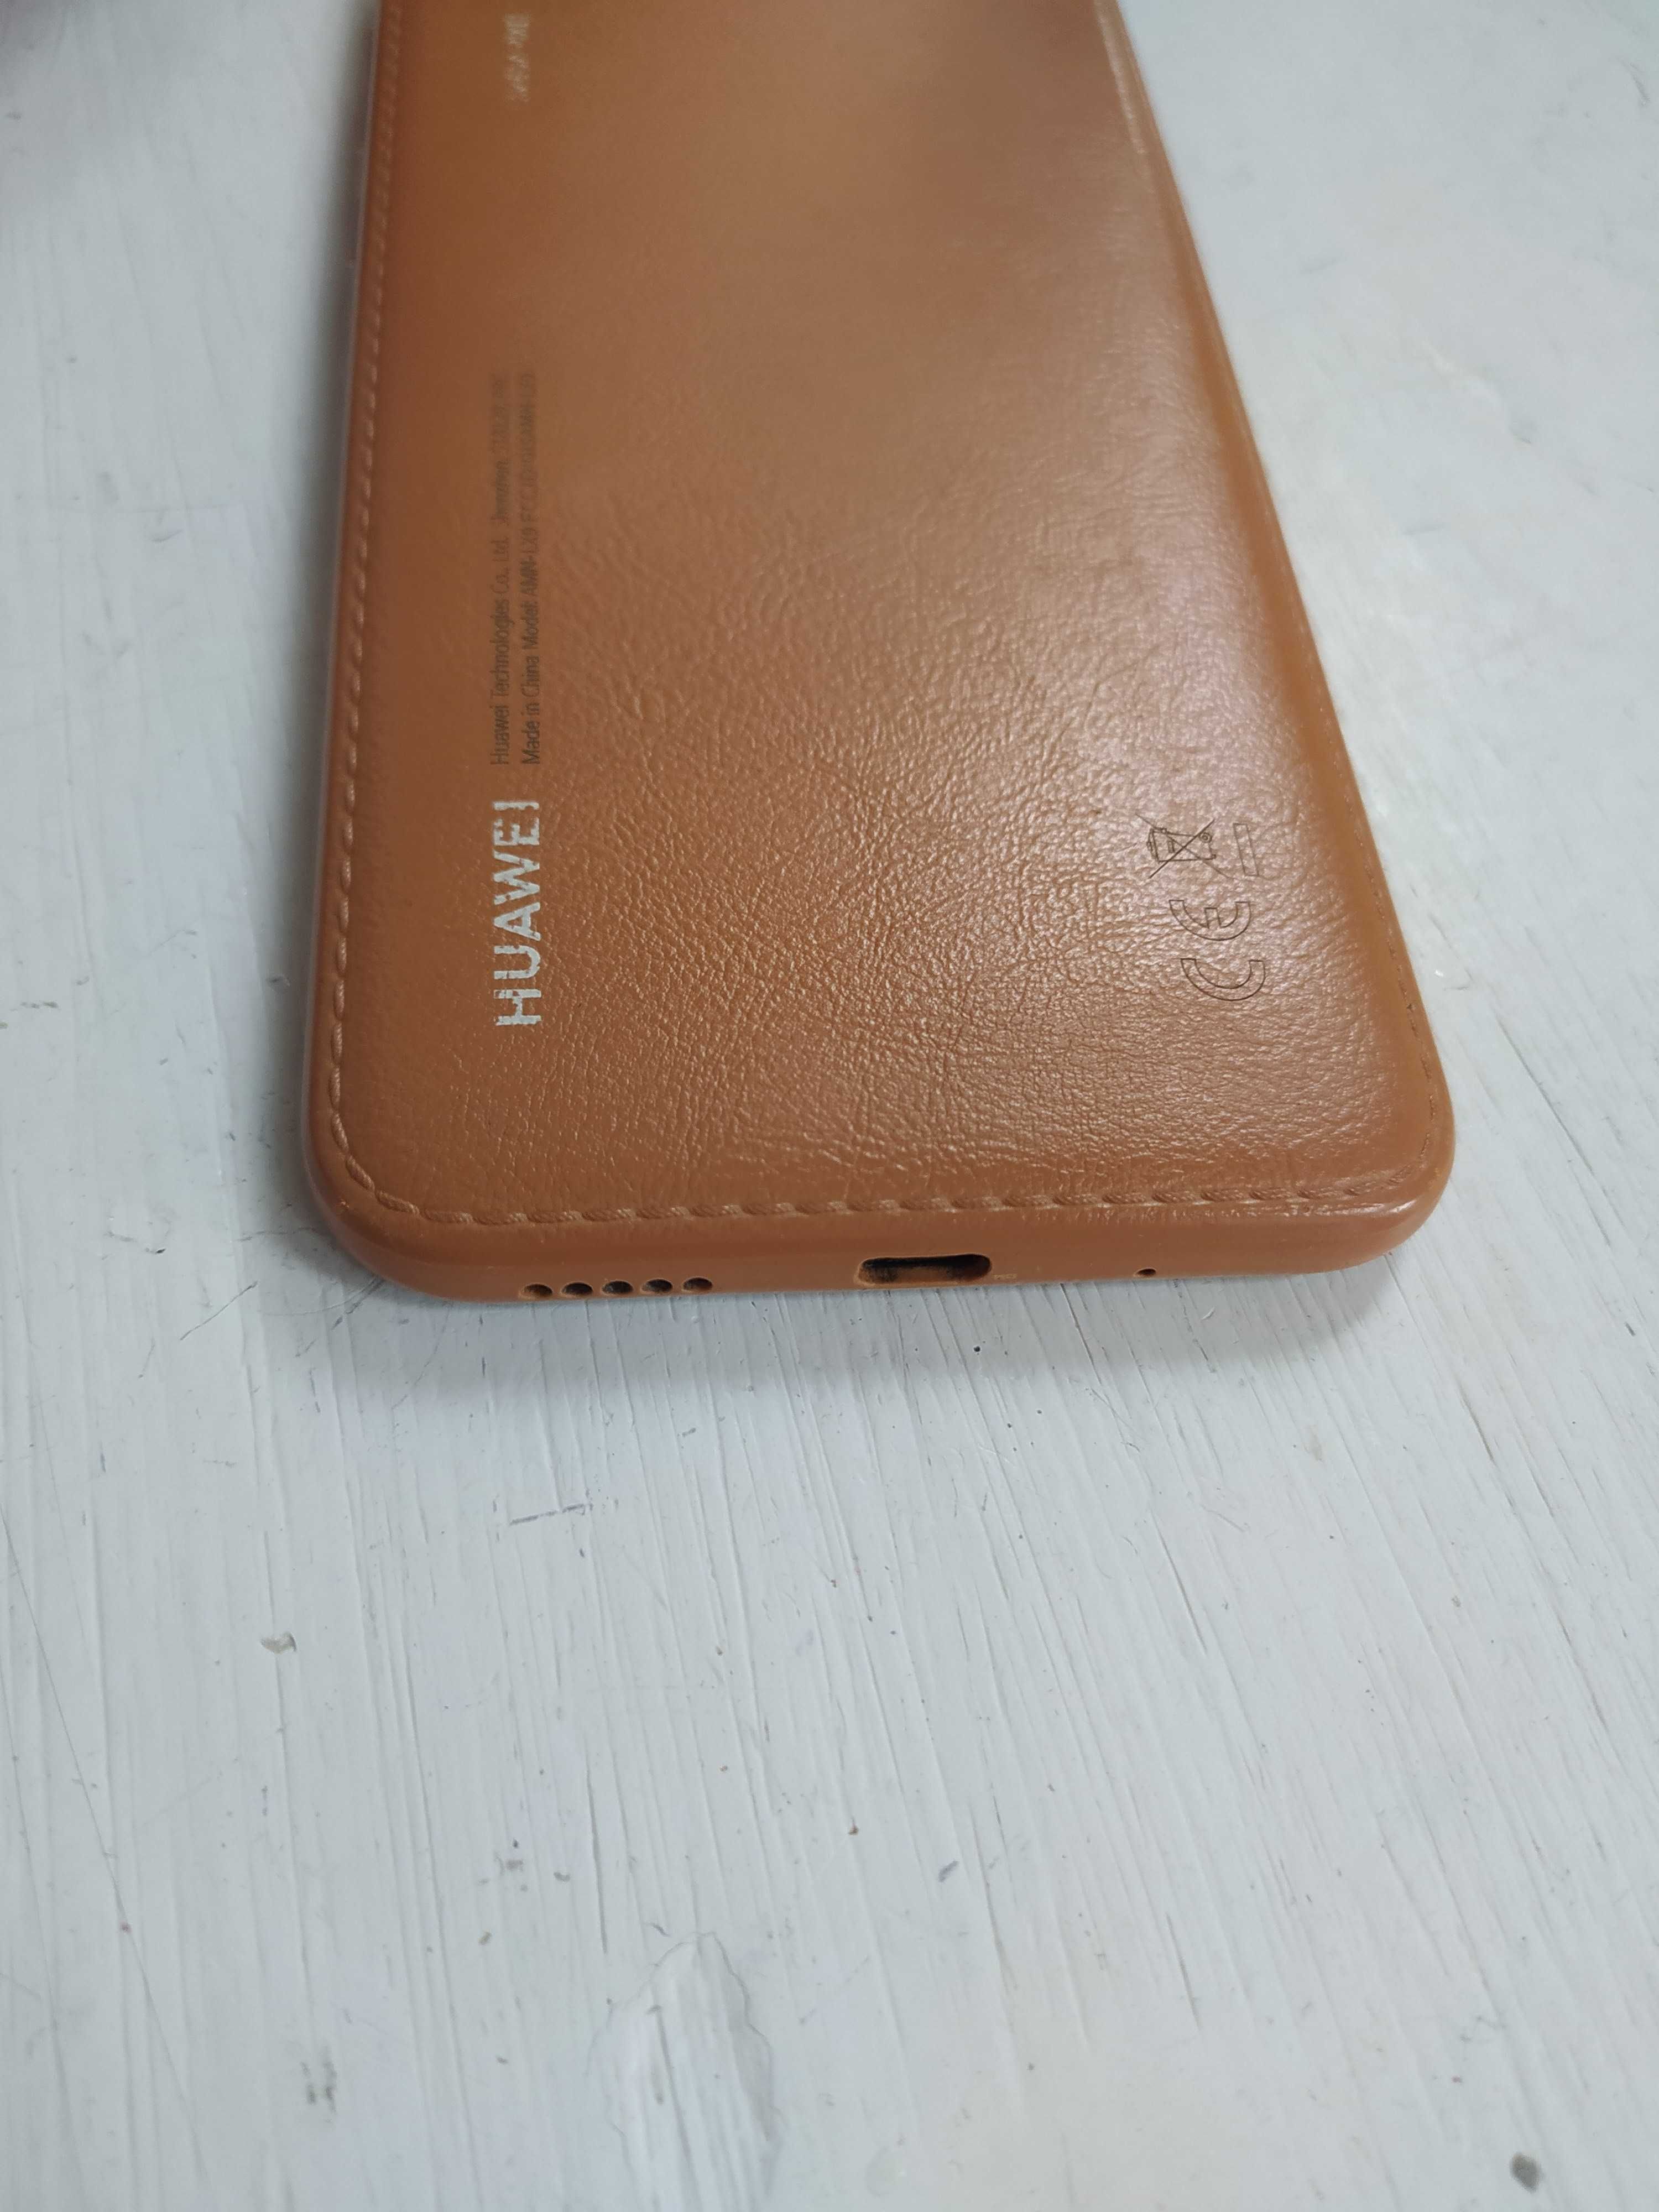 Huawei Y5 2019, 2/16, Android 9